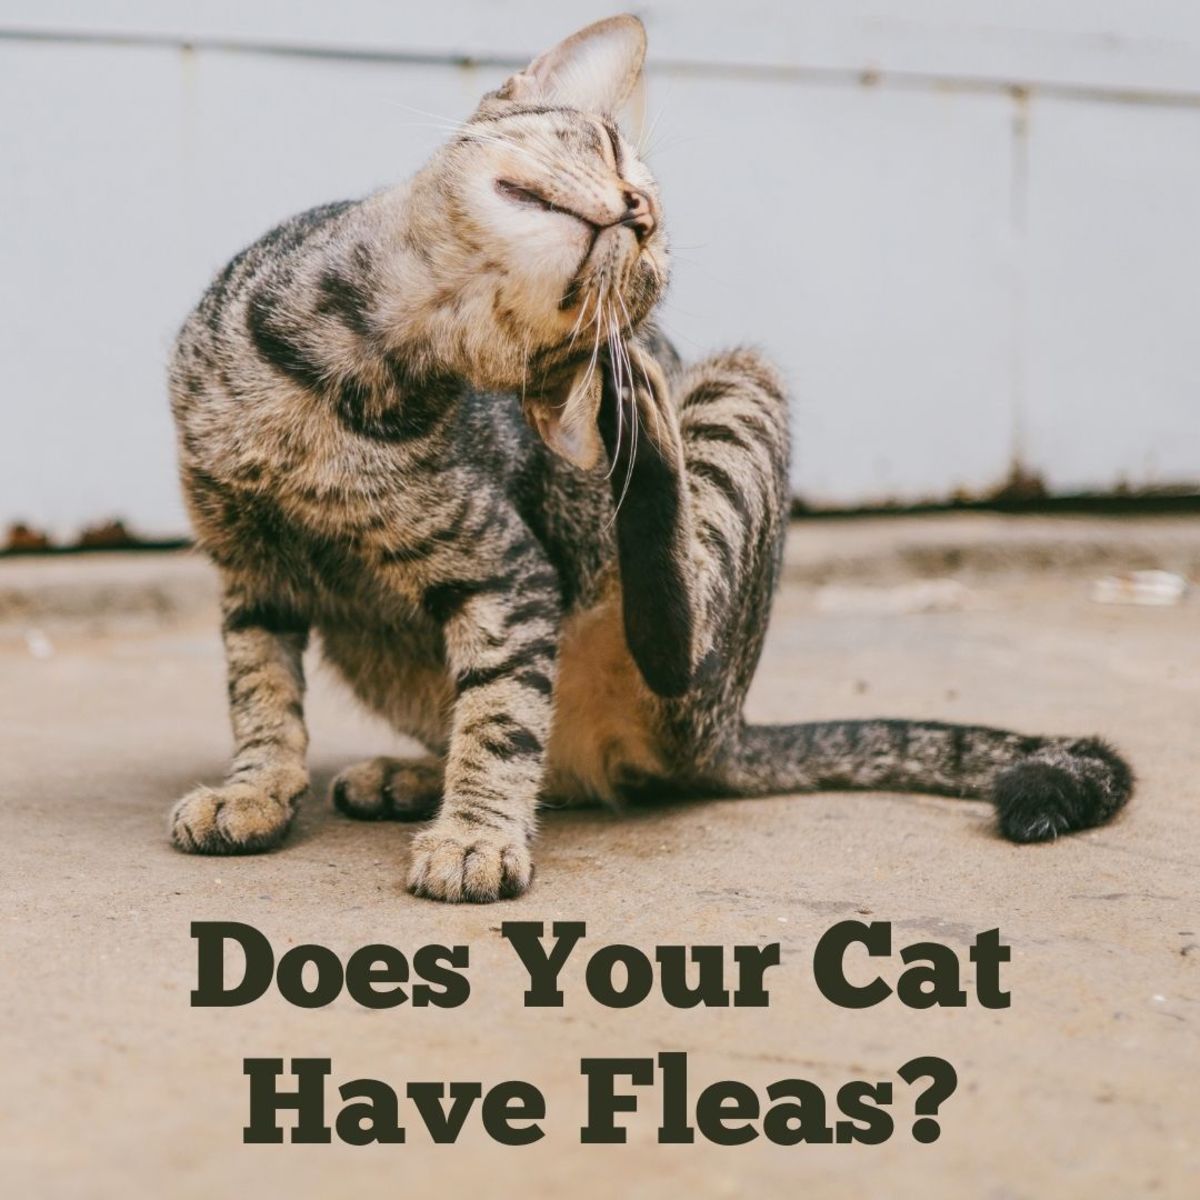 How to tell if your cat has fleas